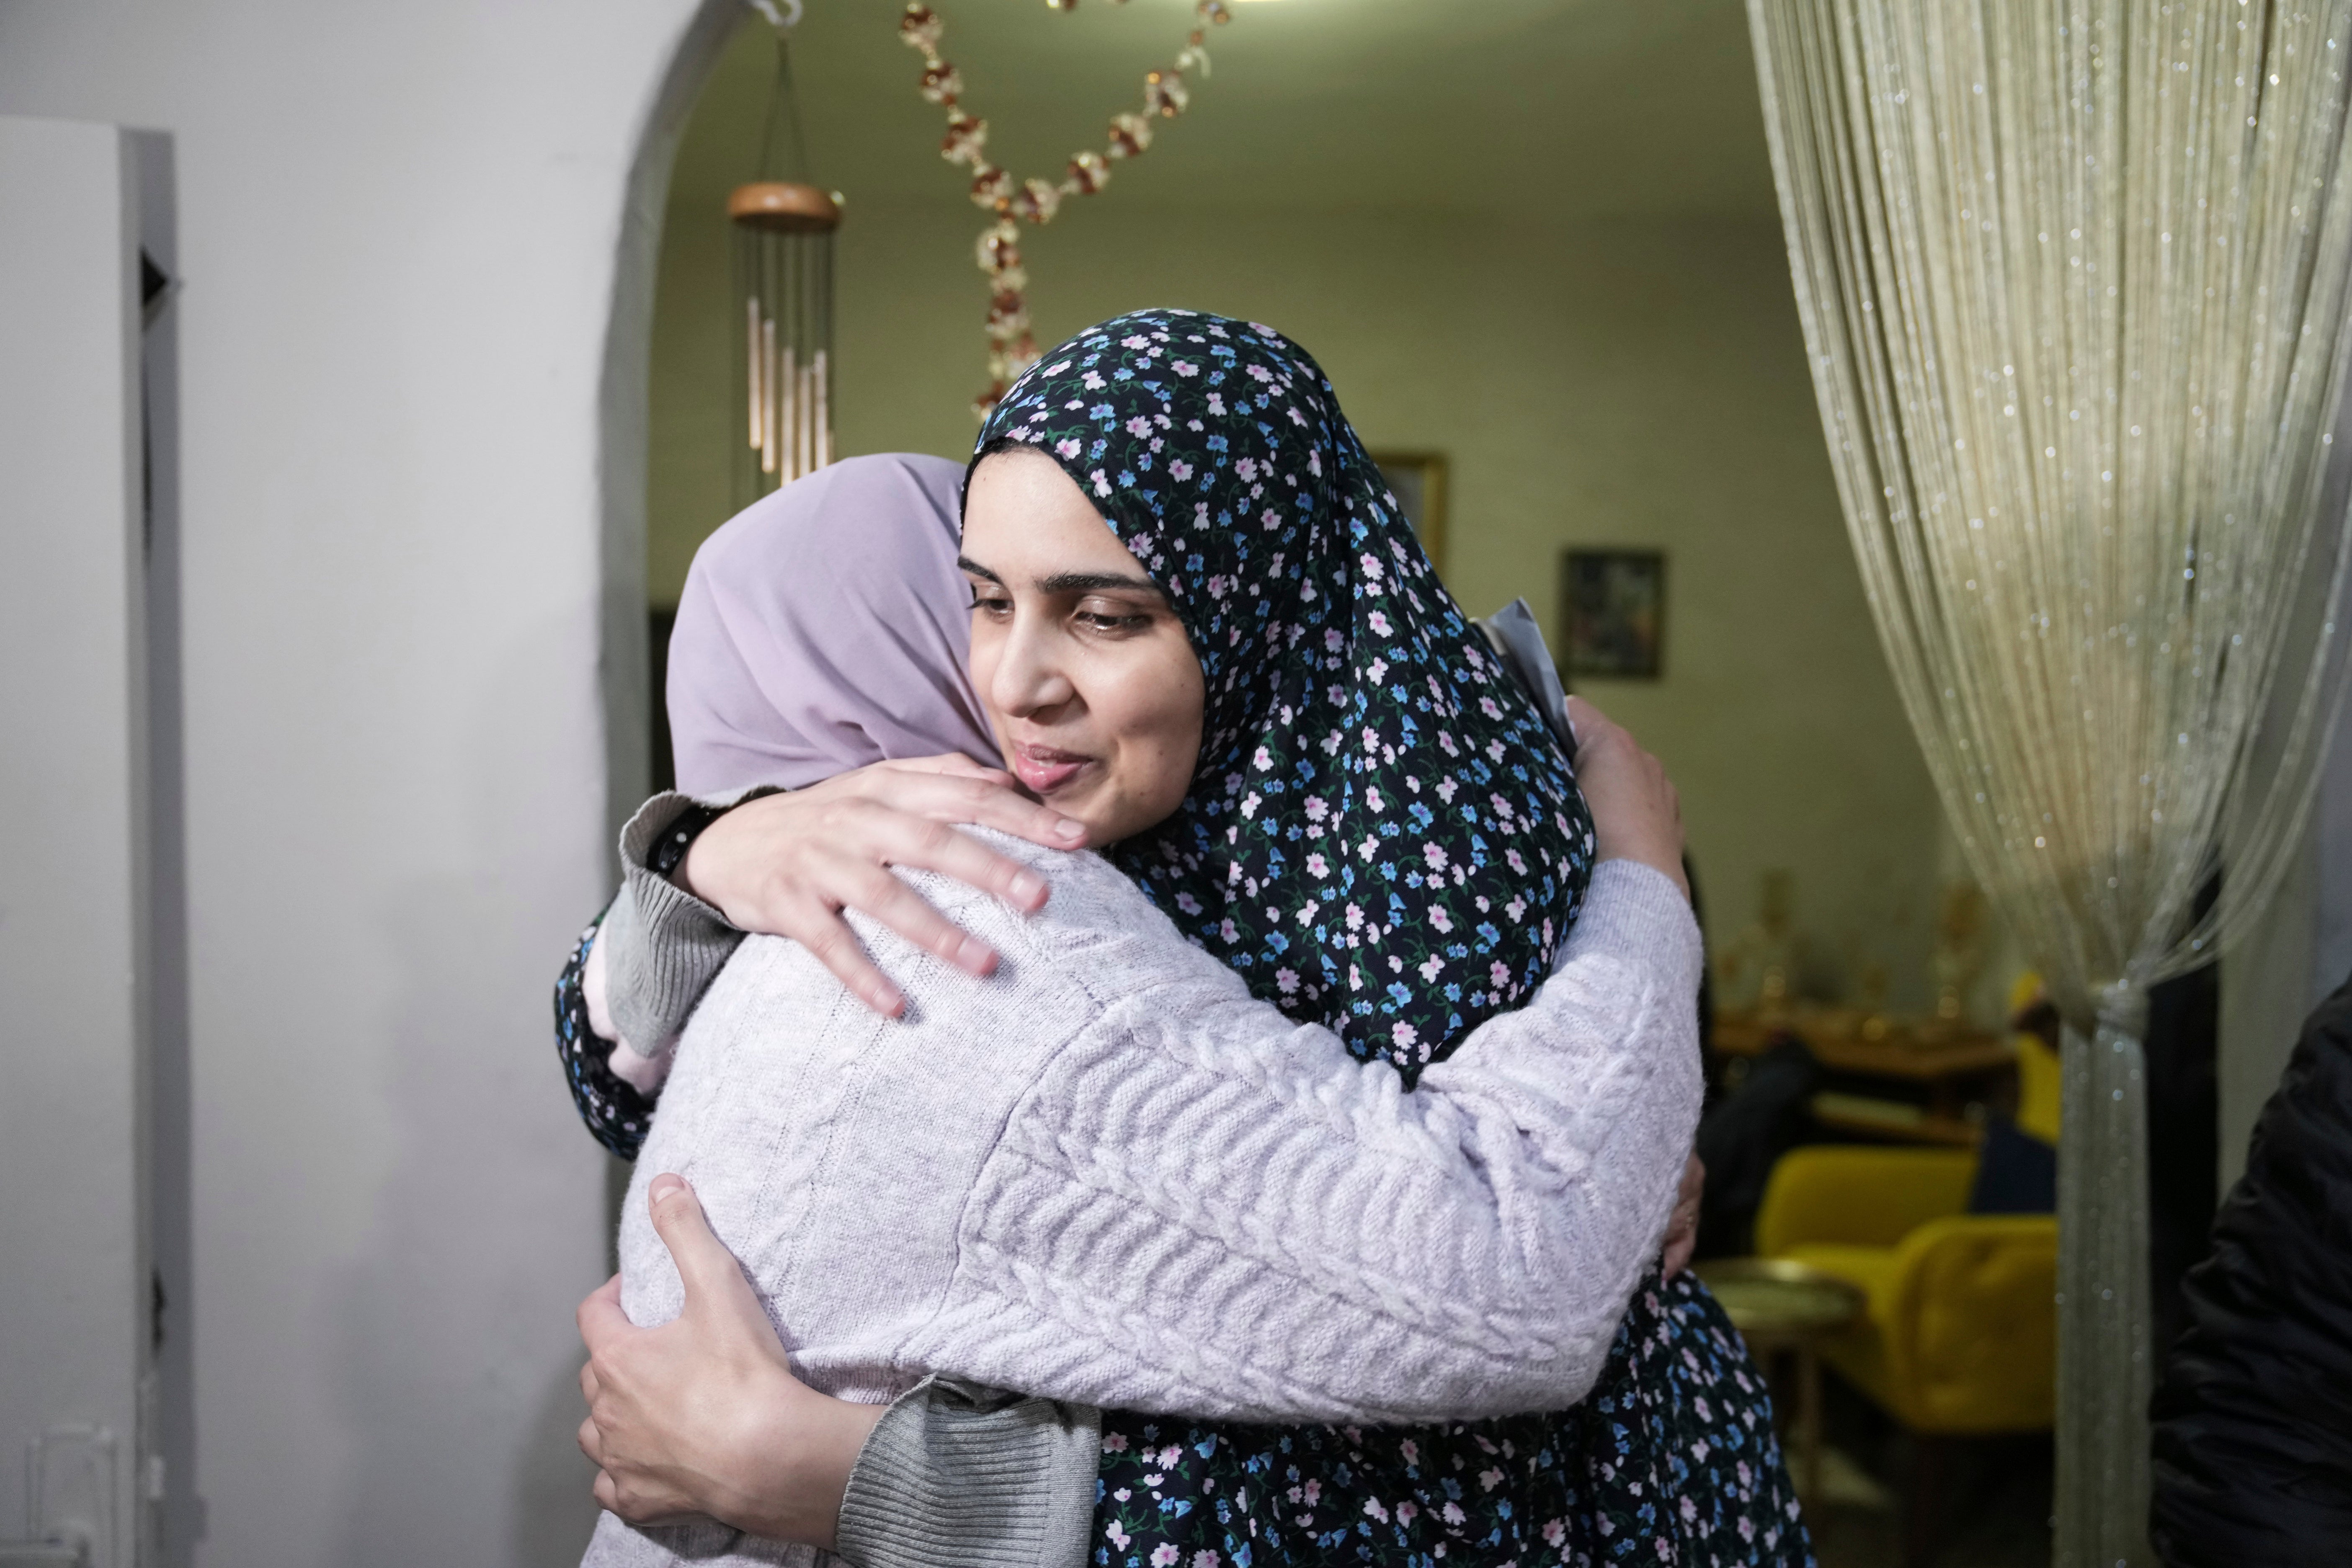 Marah Bakir, right, a former Palestinian prisoner who was released by the Israeli authorities, is welcomed at her family house in the east Jerusalem neighbourhood of Beit Hanina